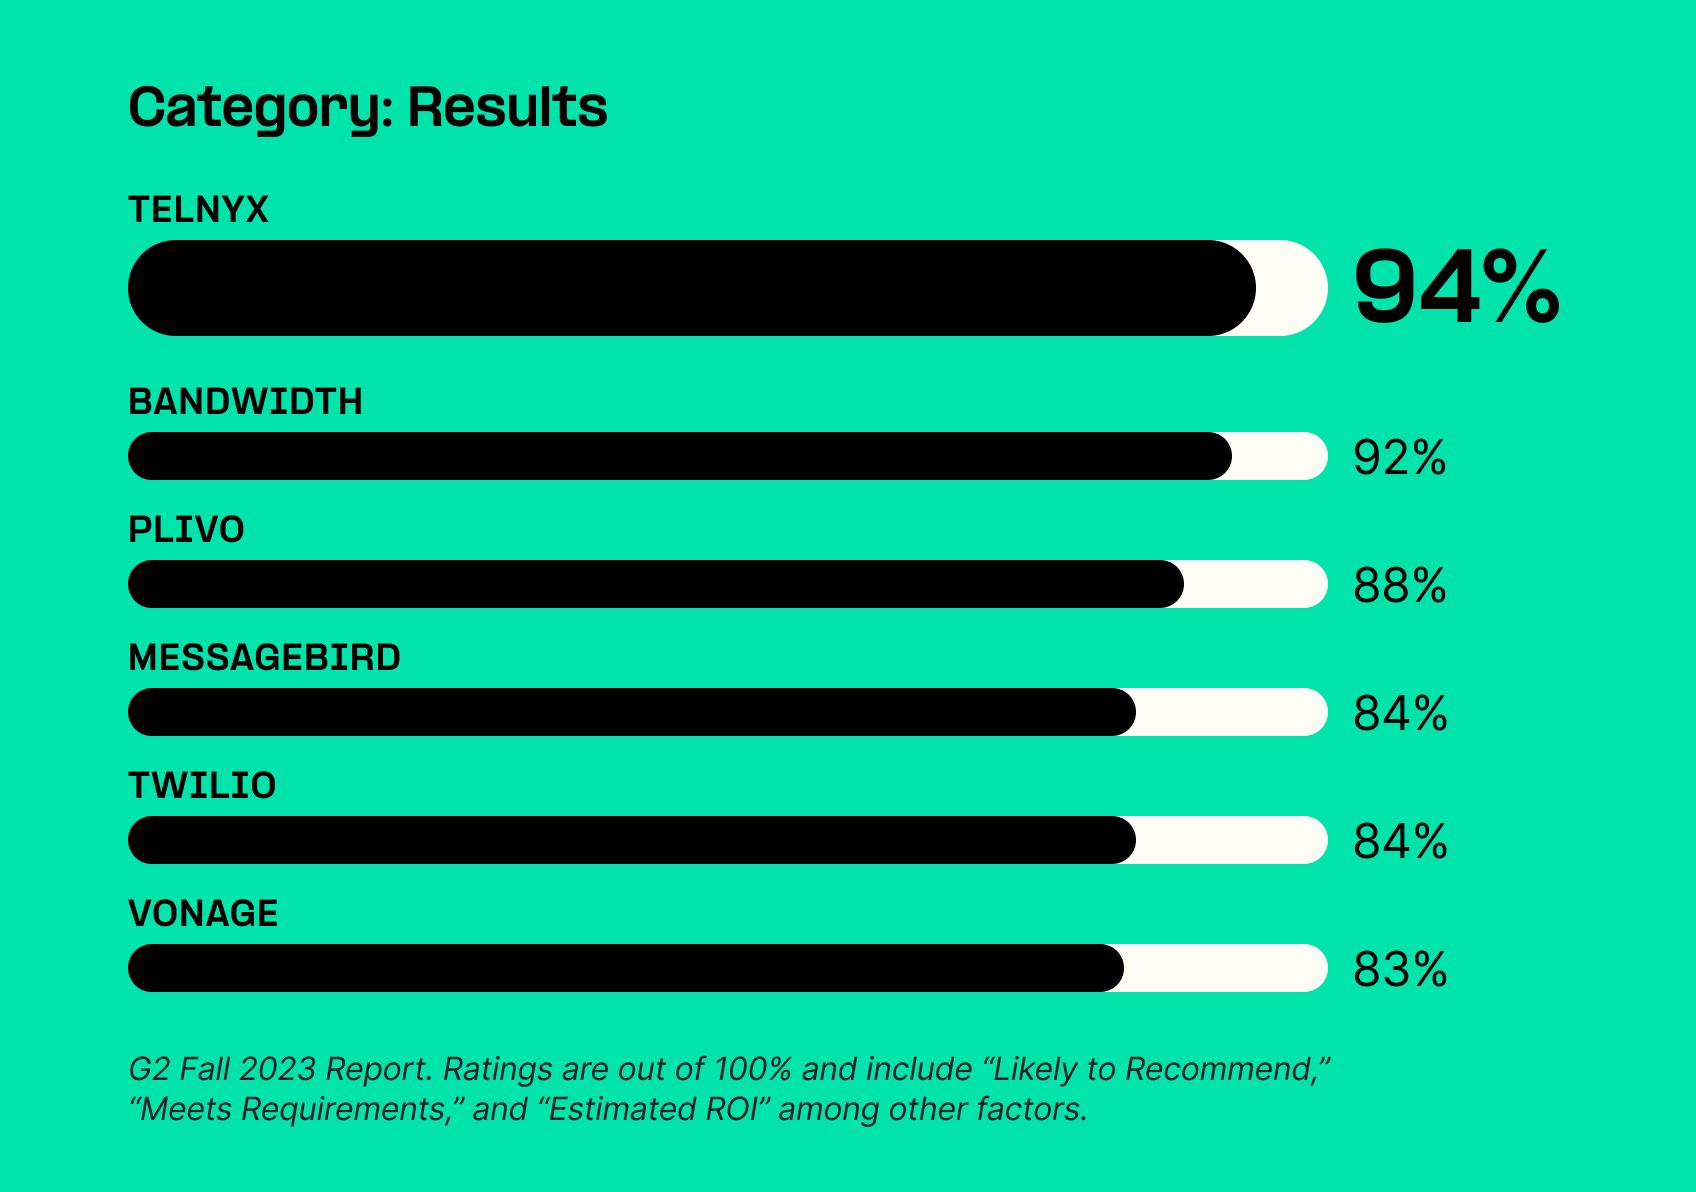 Telnyx leads in "Best Results" at 94%